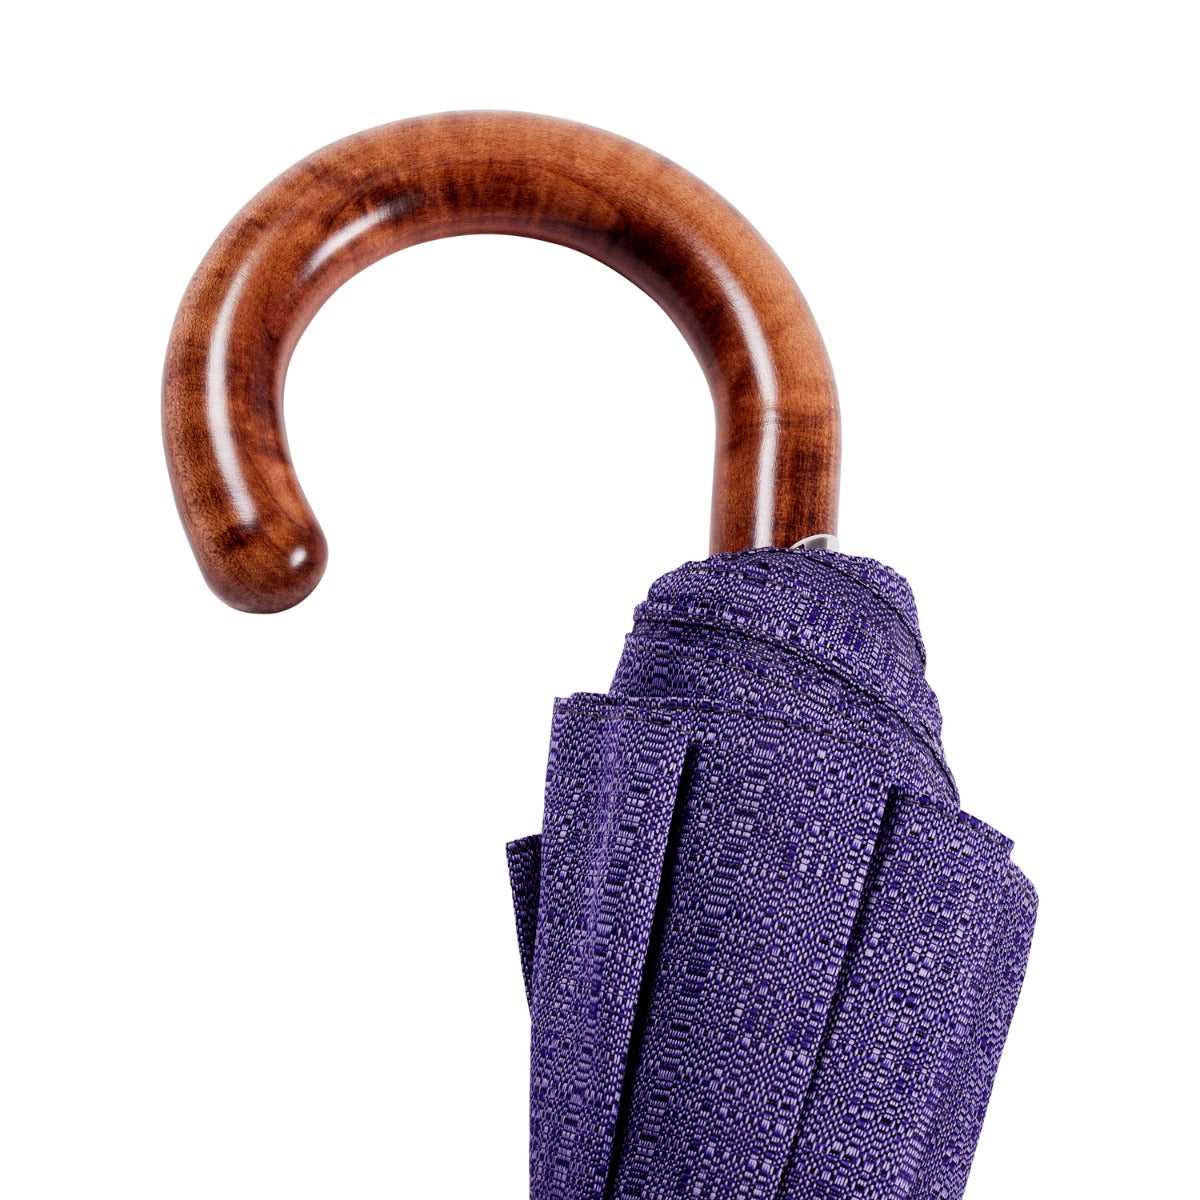 An Imperial Purple Travel Umbrella with Maple Handle, by KirbyAllison.com.